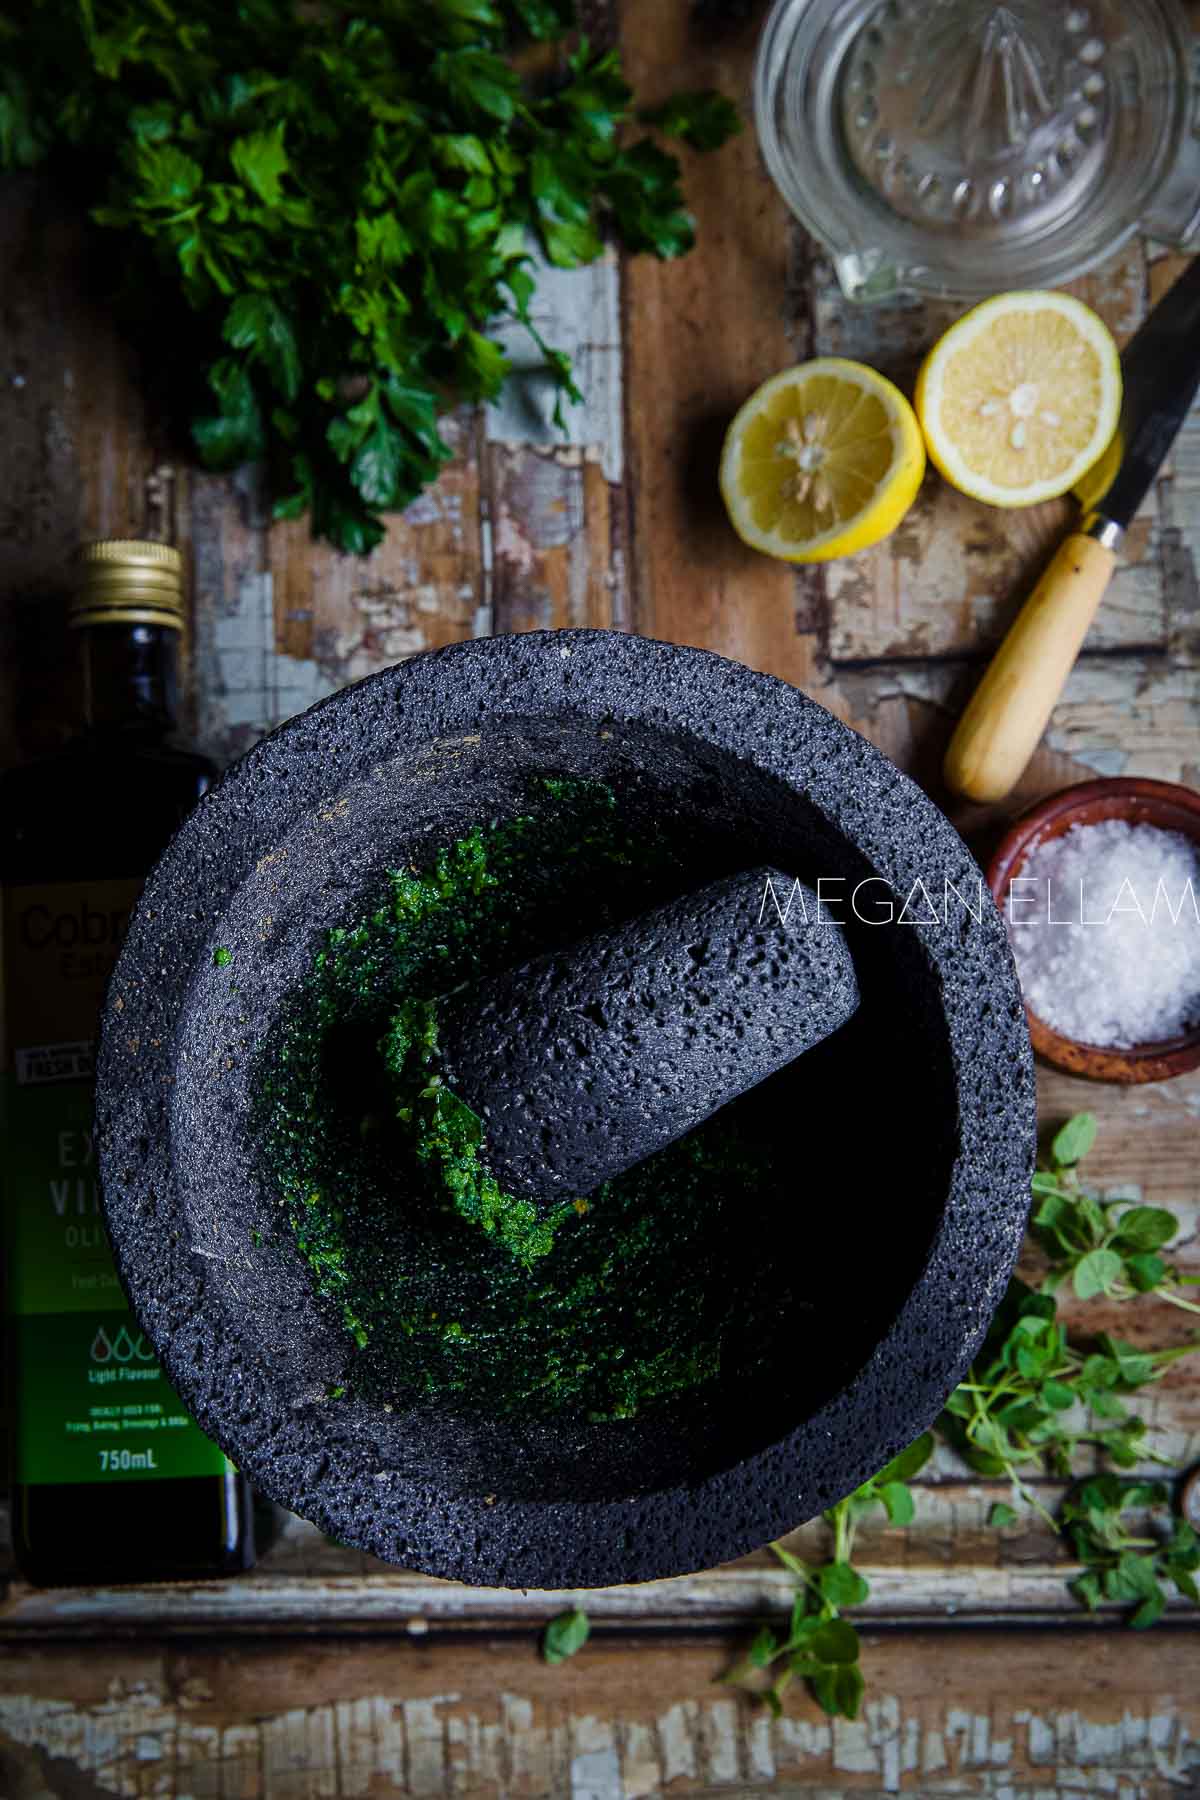 Crushed oregano and garlic in a molcajete with lemon and herbs in the background.